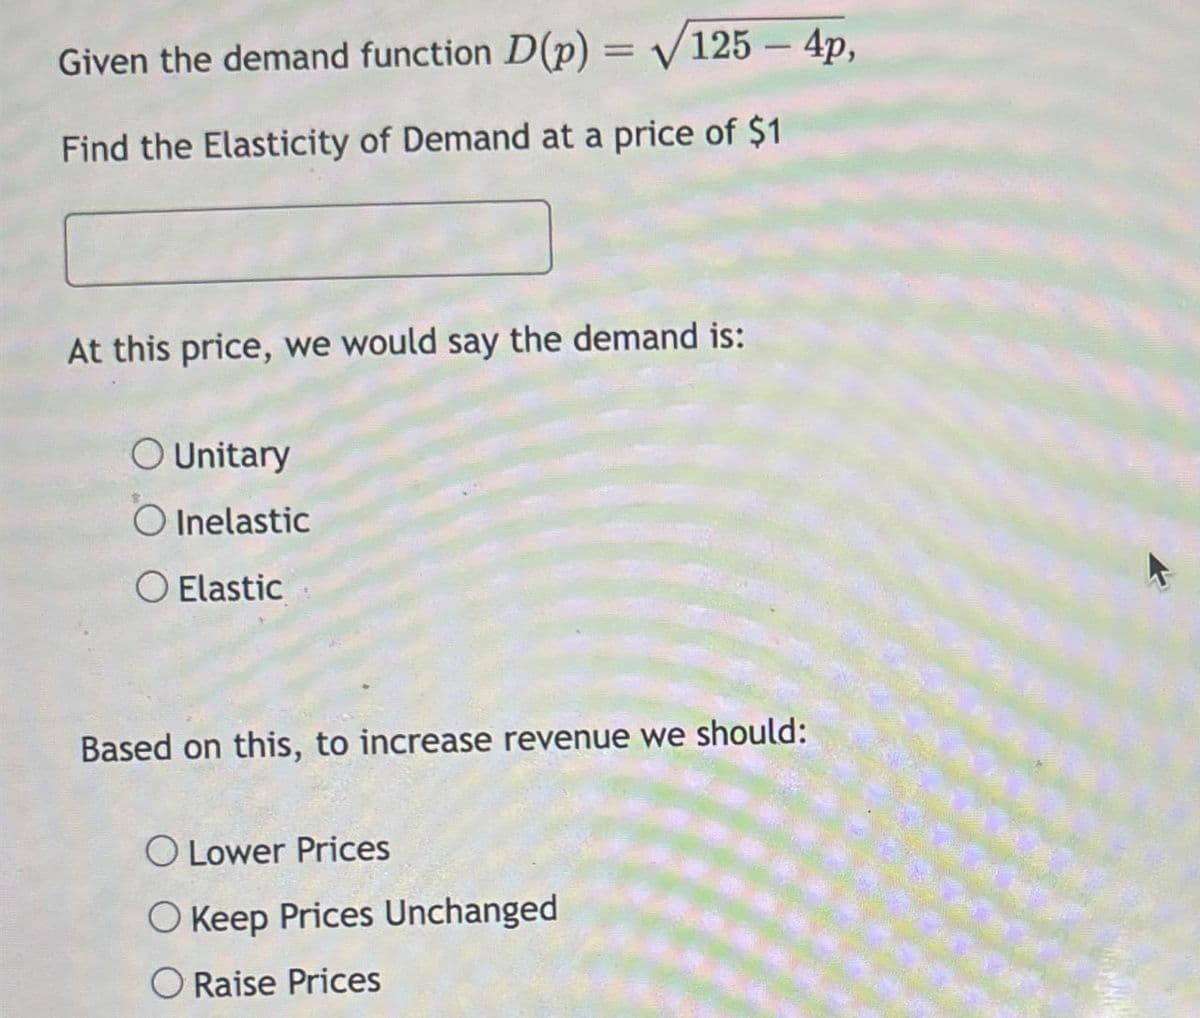 Given the demand function D(p) = √125 - 4p,
Find the Elasticity of Demand at a price of $1
At this price, we would say the demand is:
O Unitary
Inelastic
Elastic
Based on this, to increase revenue we should:
O Lower Prices
O Keep Prices Unchanged
Raise Prices